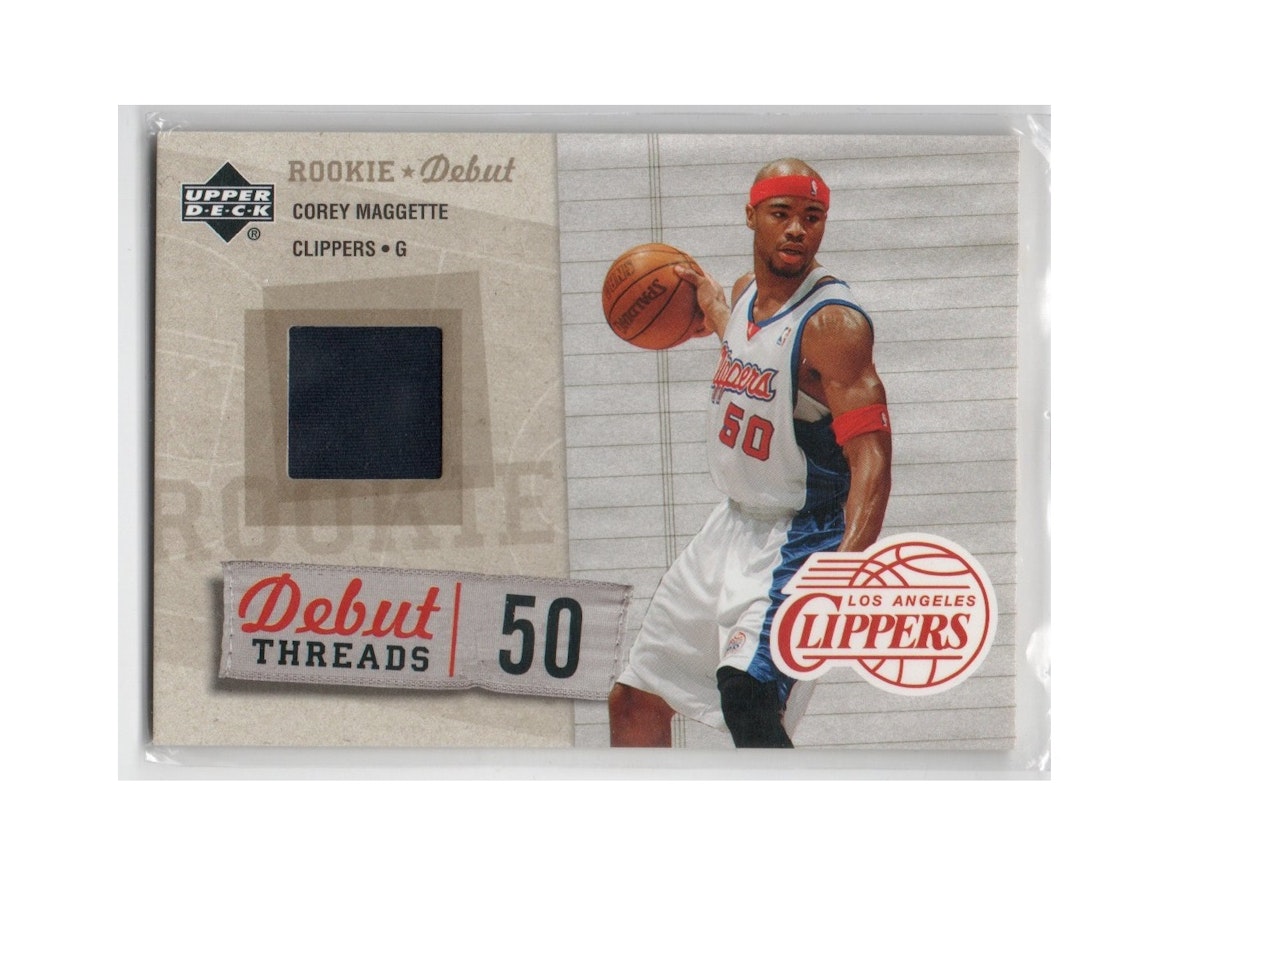 2005-06 Upper Deck Rookie Debut Threads #CM Corey Maggette (30-X253-NBACLIPPERS)